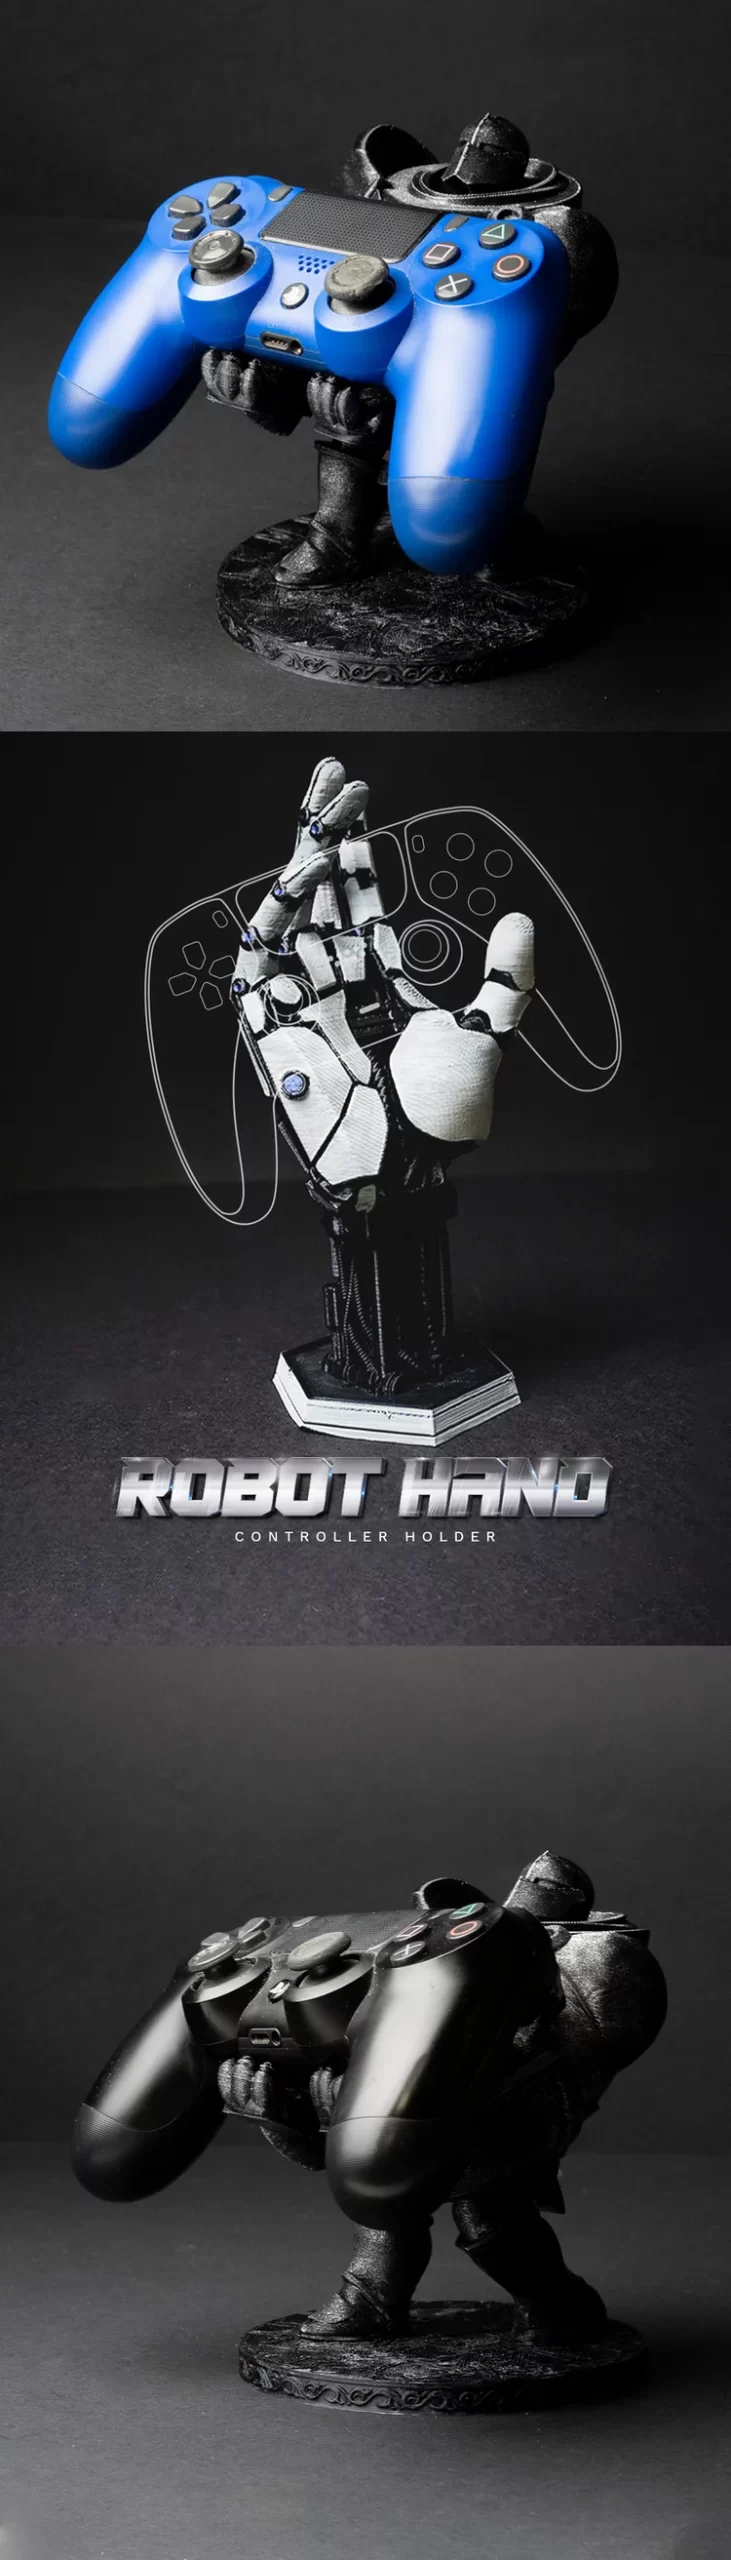 Knight Controller Holder and Robot Hand Controller Holder